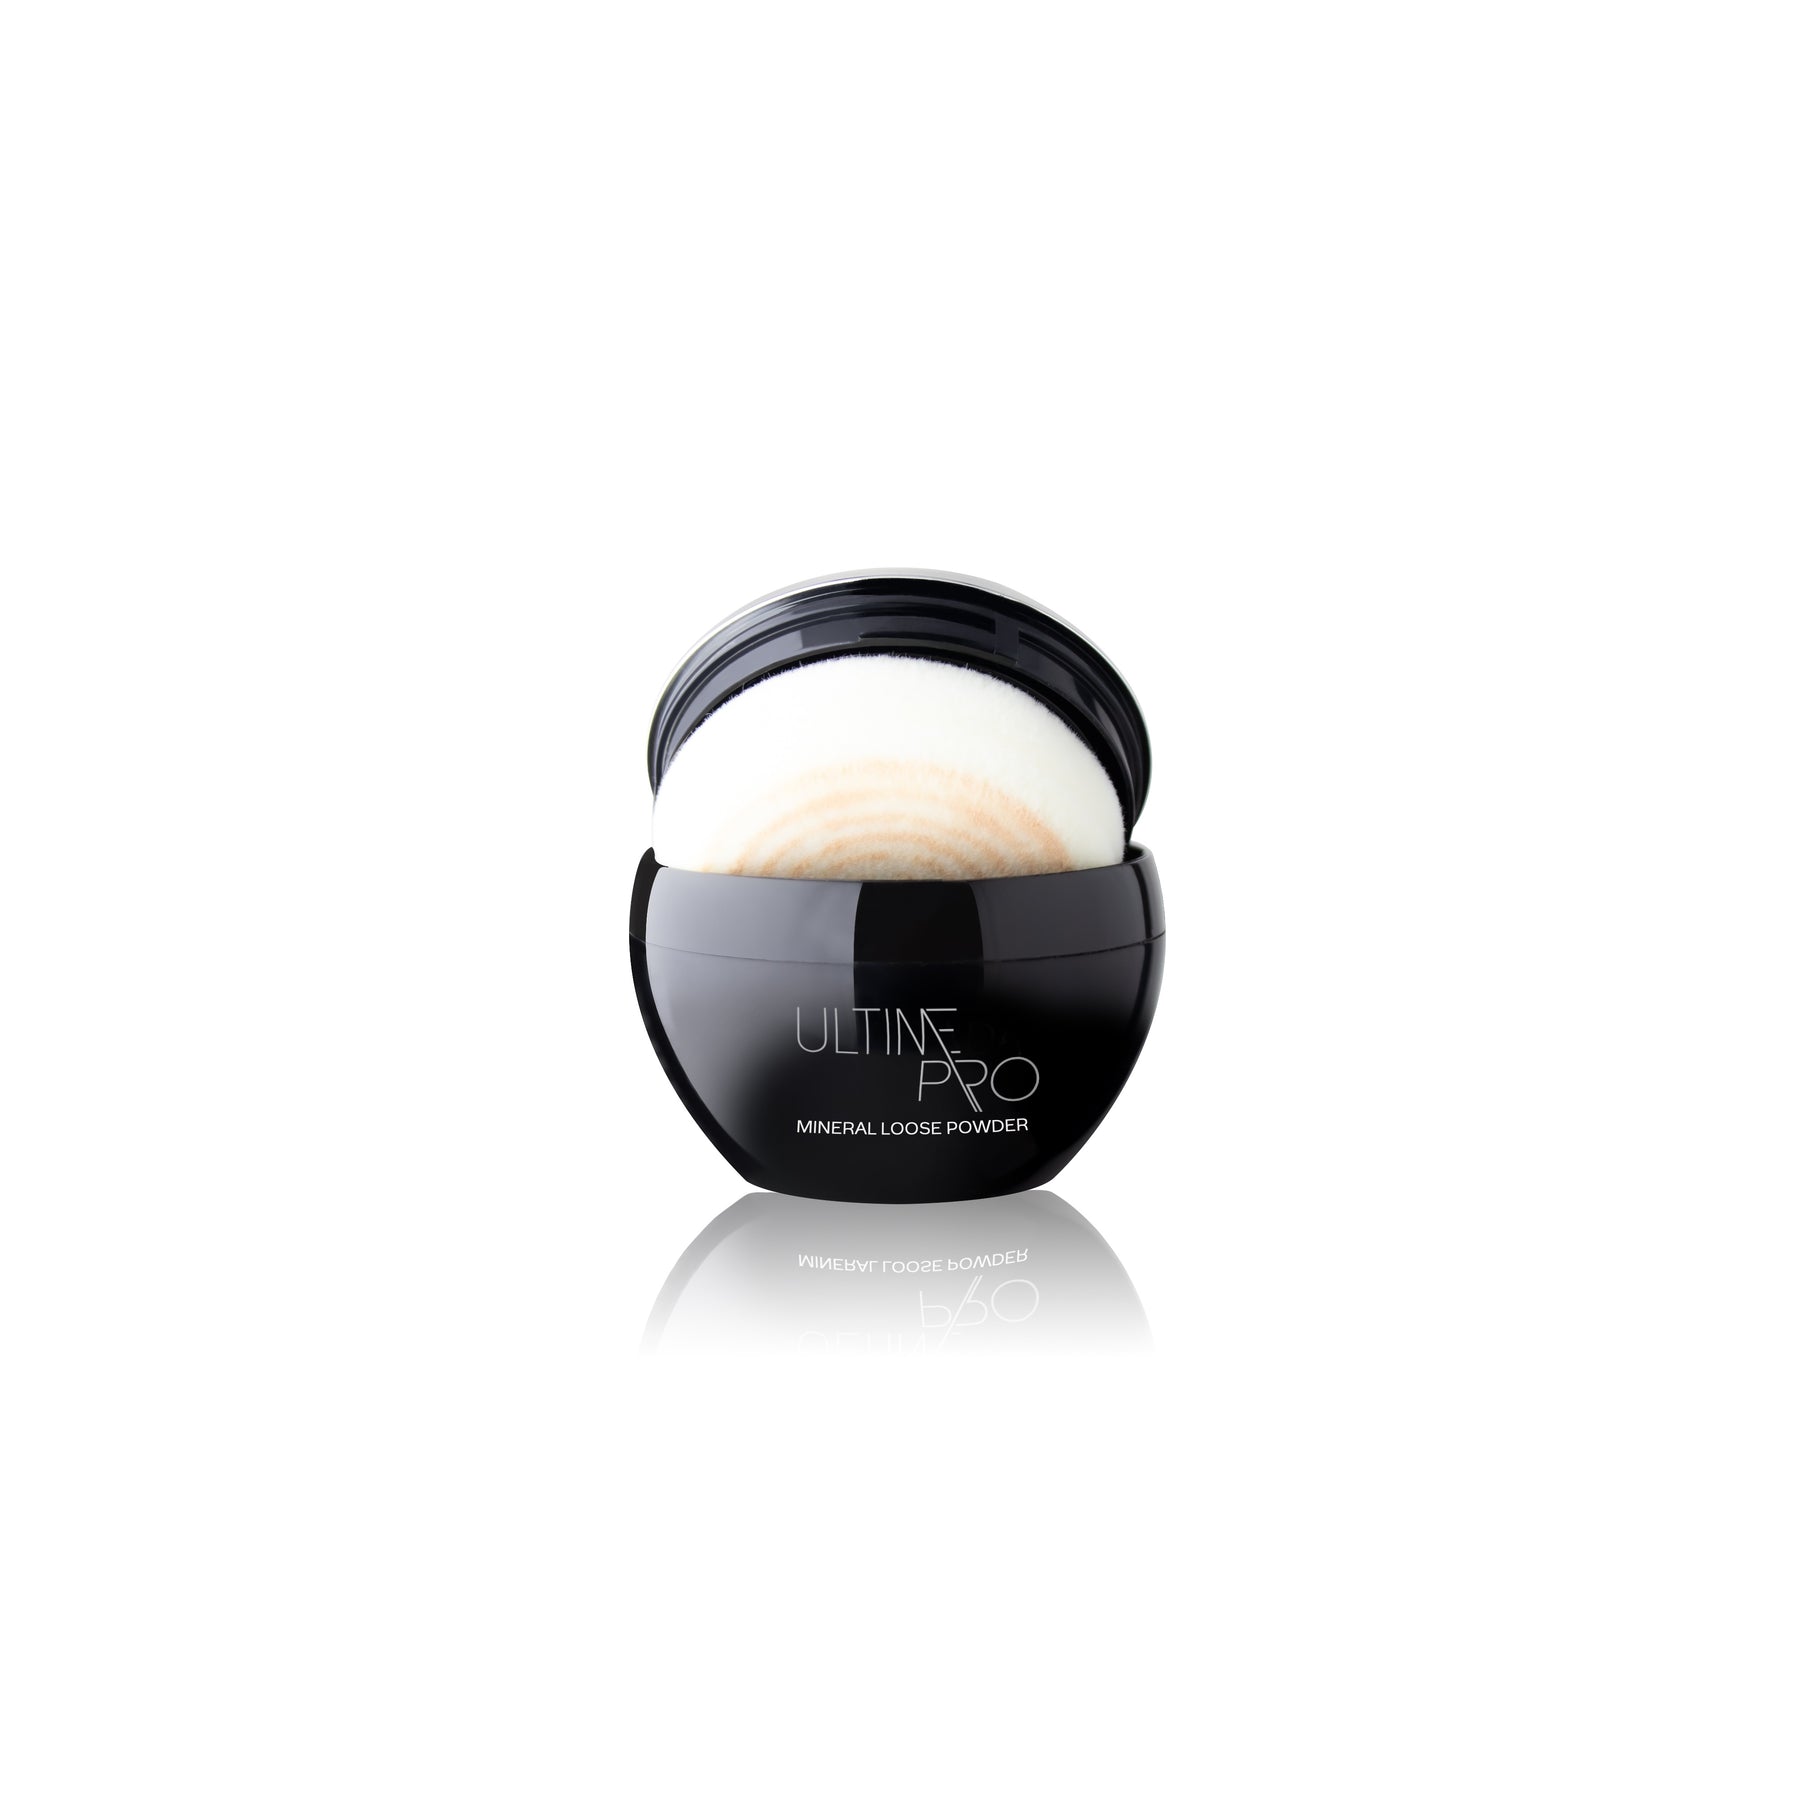 Faces Canada Ultime Pro Mineral Loose Powder Faces Canada